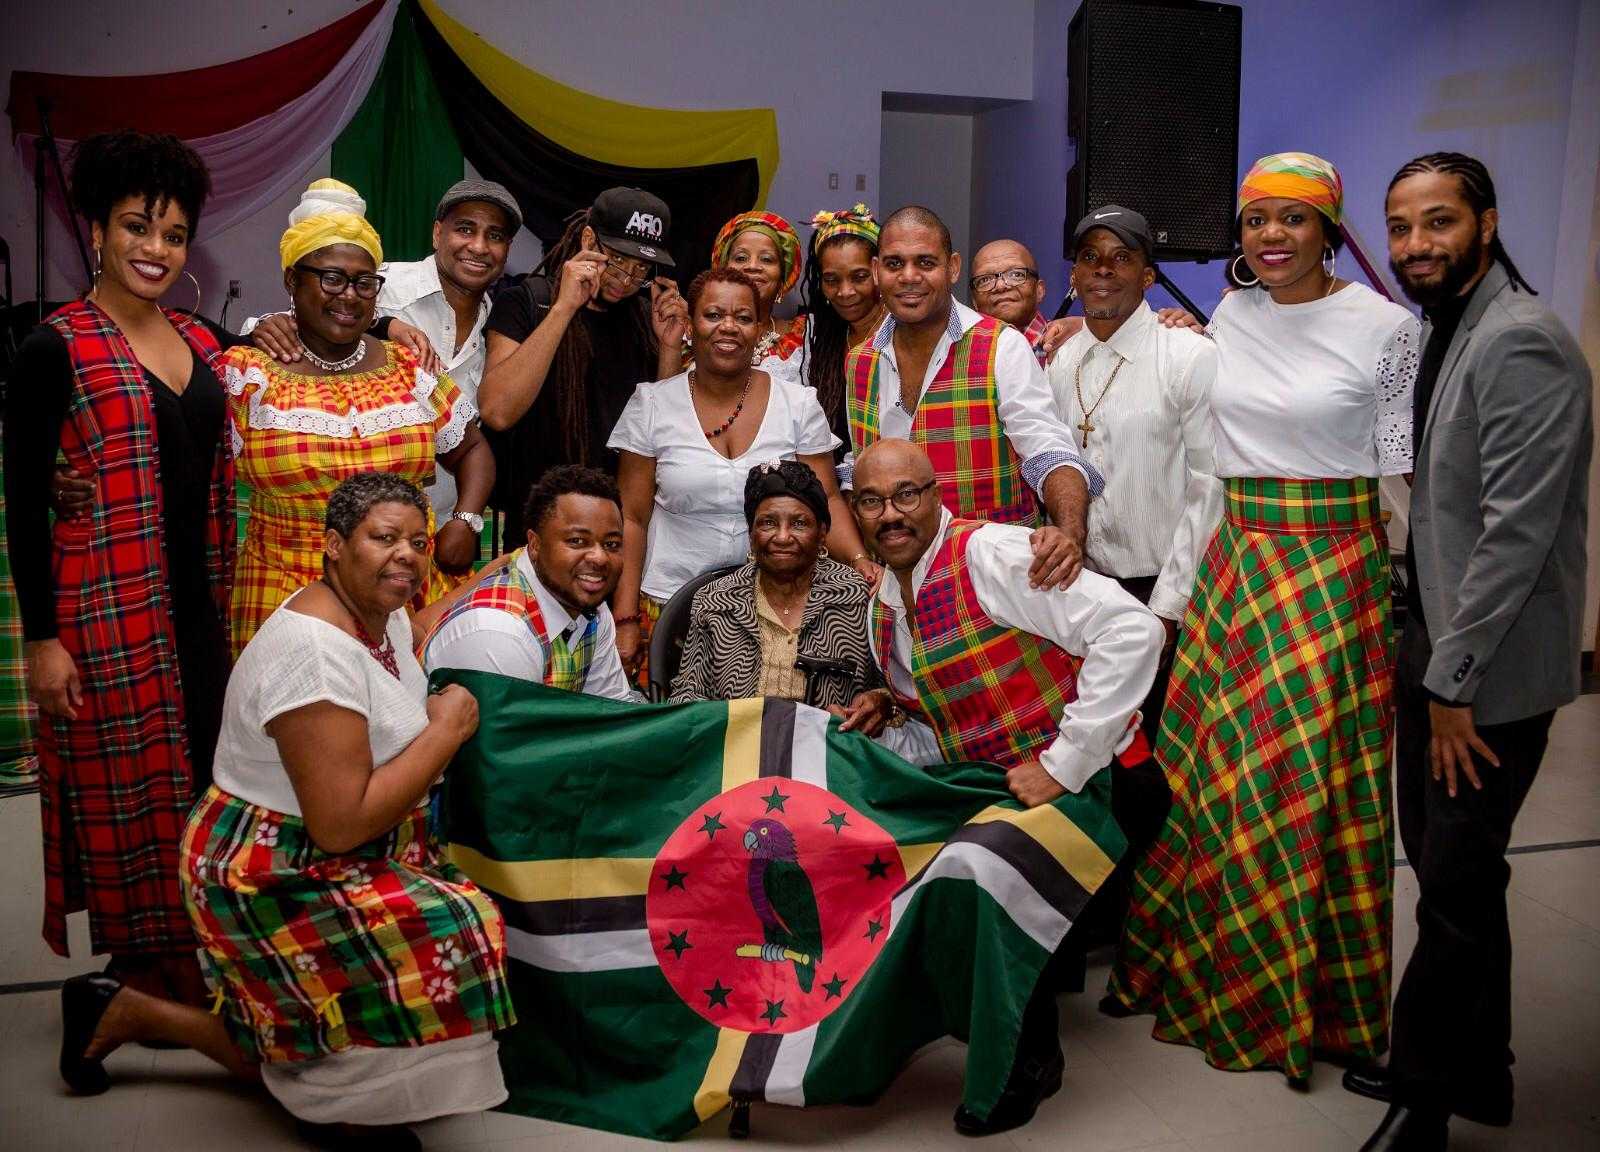 DOMINICANS CELEBRATE INDEPENDENCE IN WESTERN CANADA